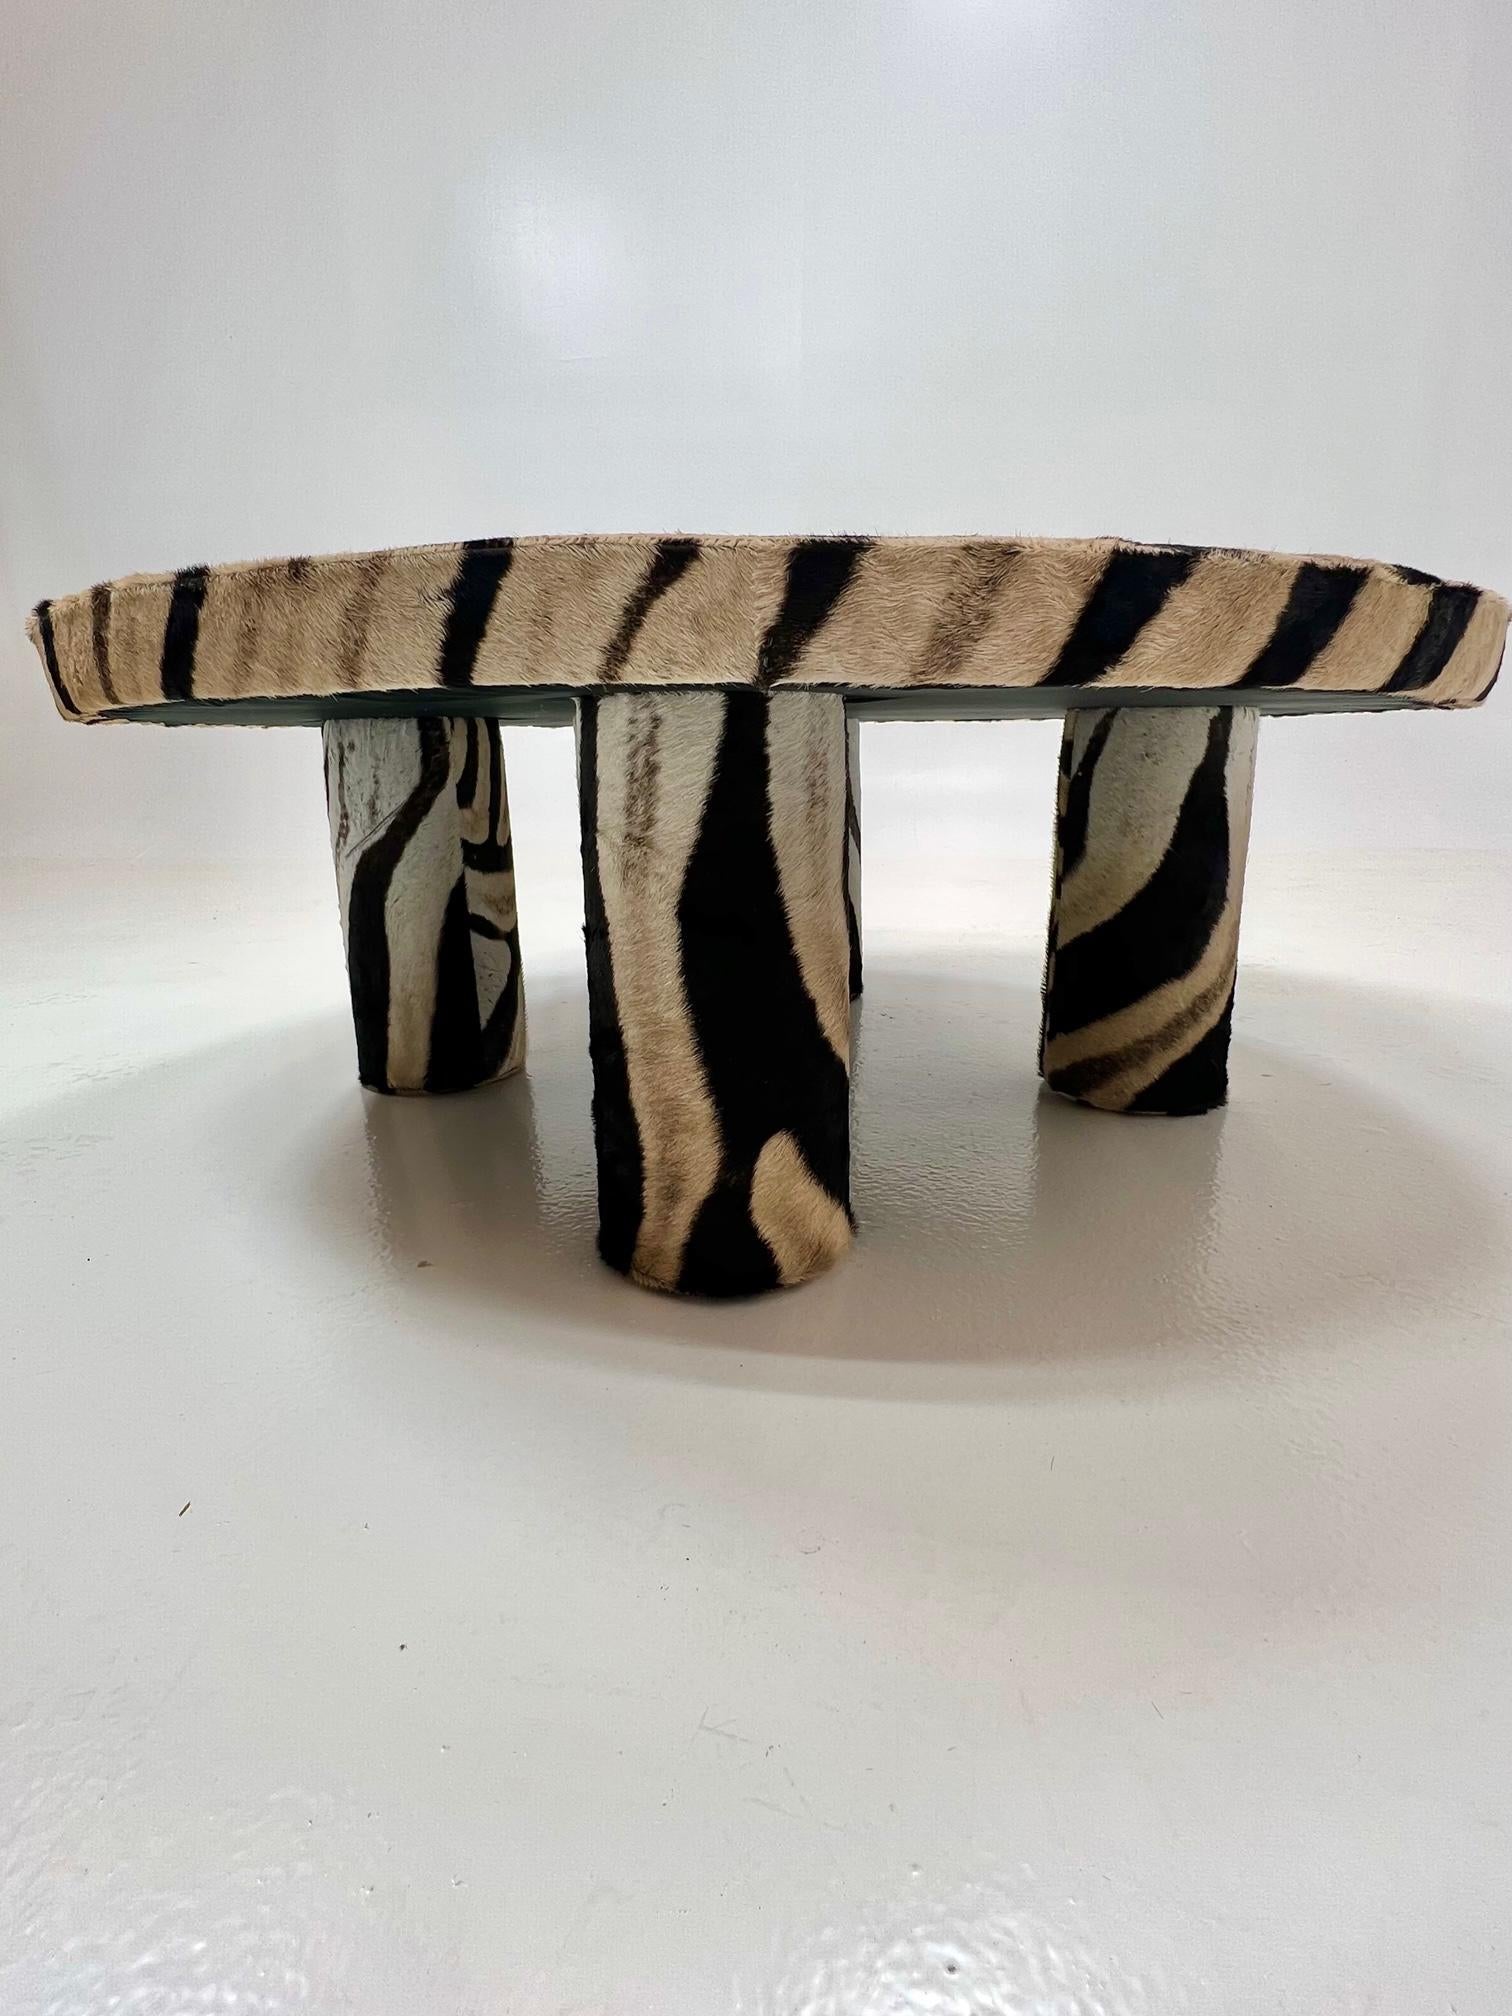 This chic and fun coffee table is an original design out of the Originals by Gomez catalog. With a cedarwood frame, this table is a beauty to have in one’s possession. Outfitted with a high-grade South African zebra hide, the low lying table is a